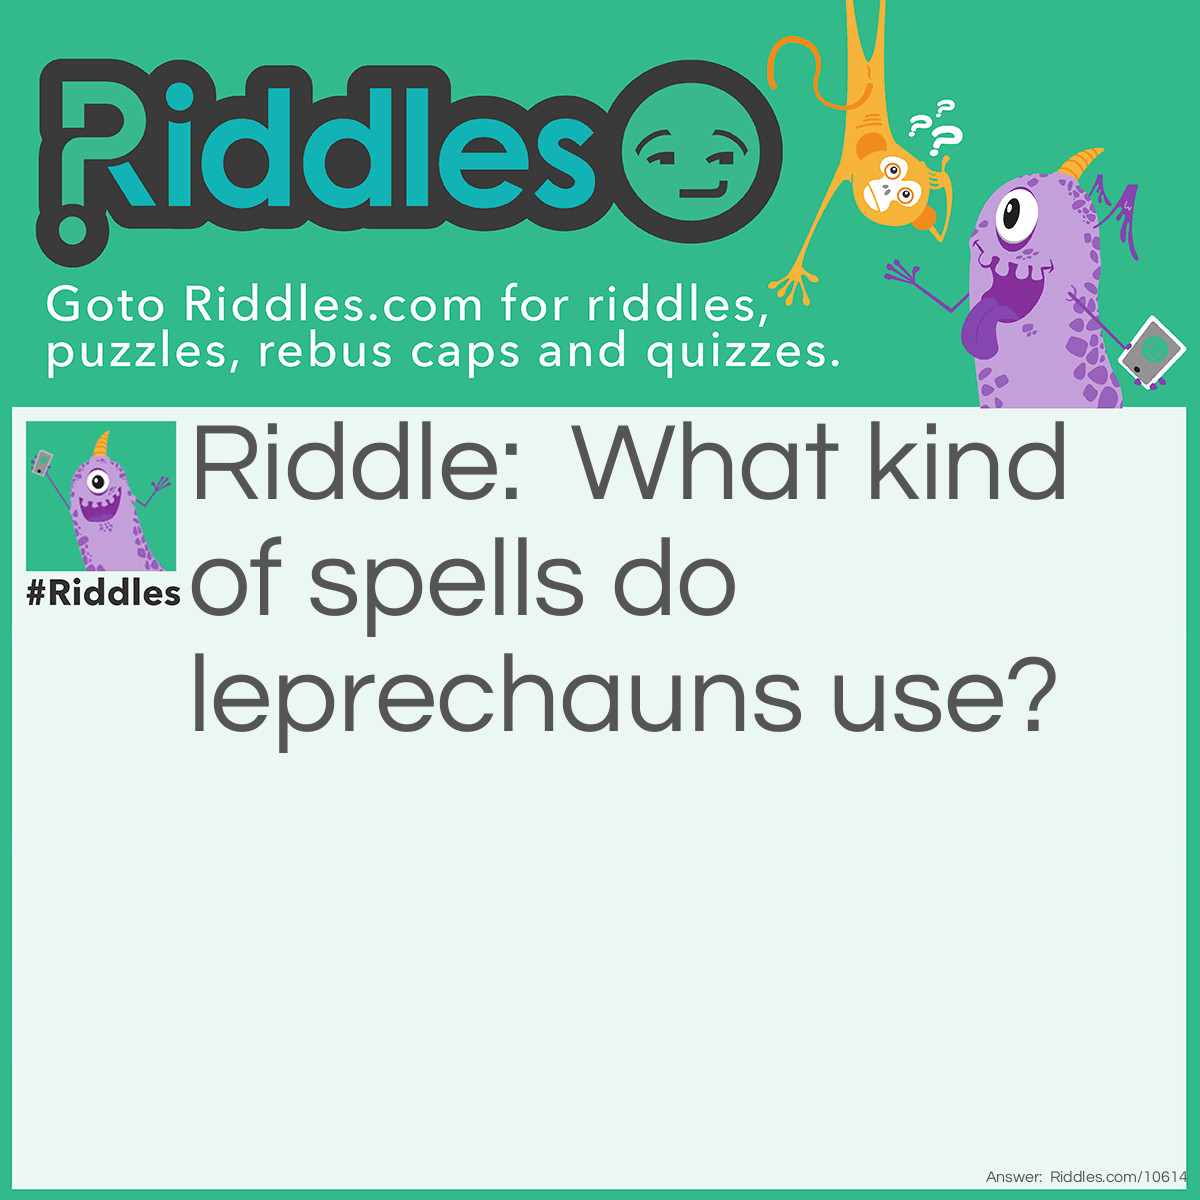 Riddle: What kind of spells do leprechauns use? Answer: Lucky Charms!